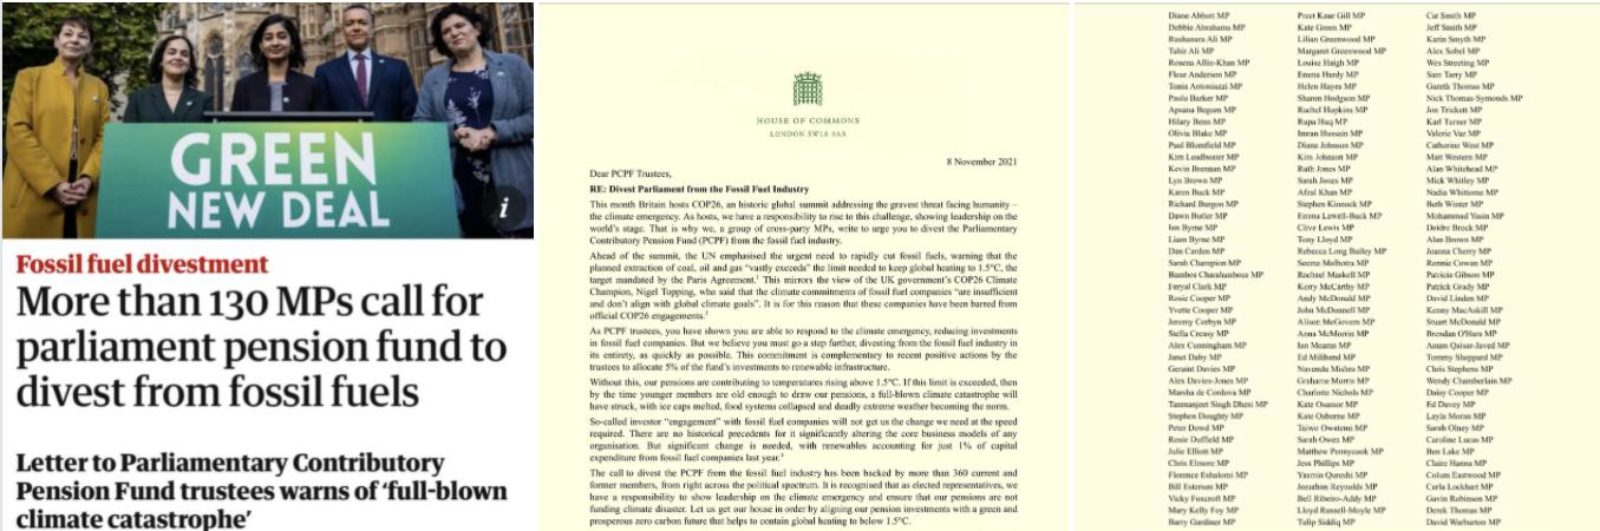 Image shows a copy of a letter on Parliamentary paper